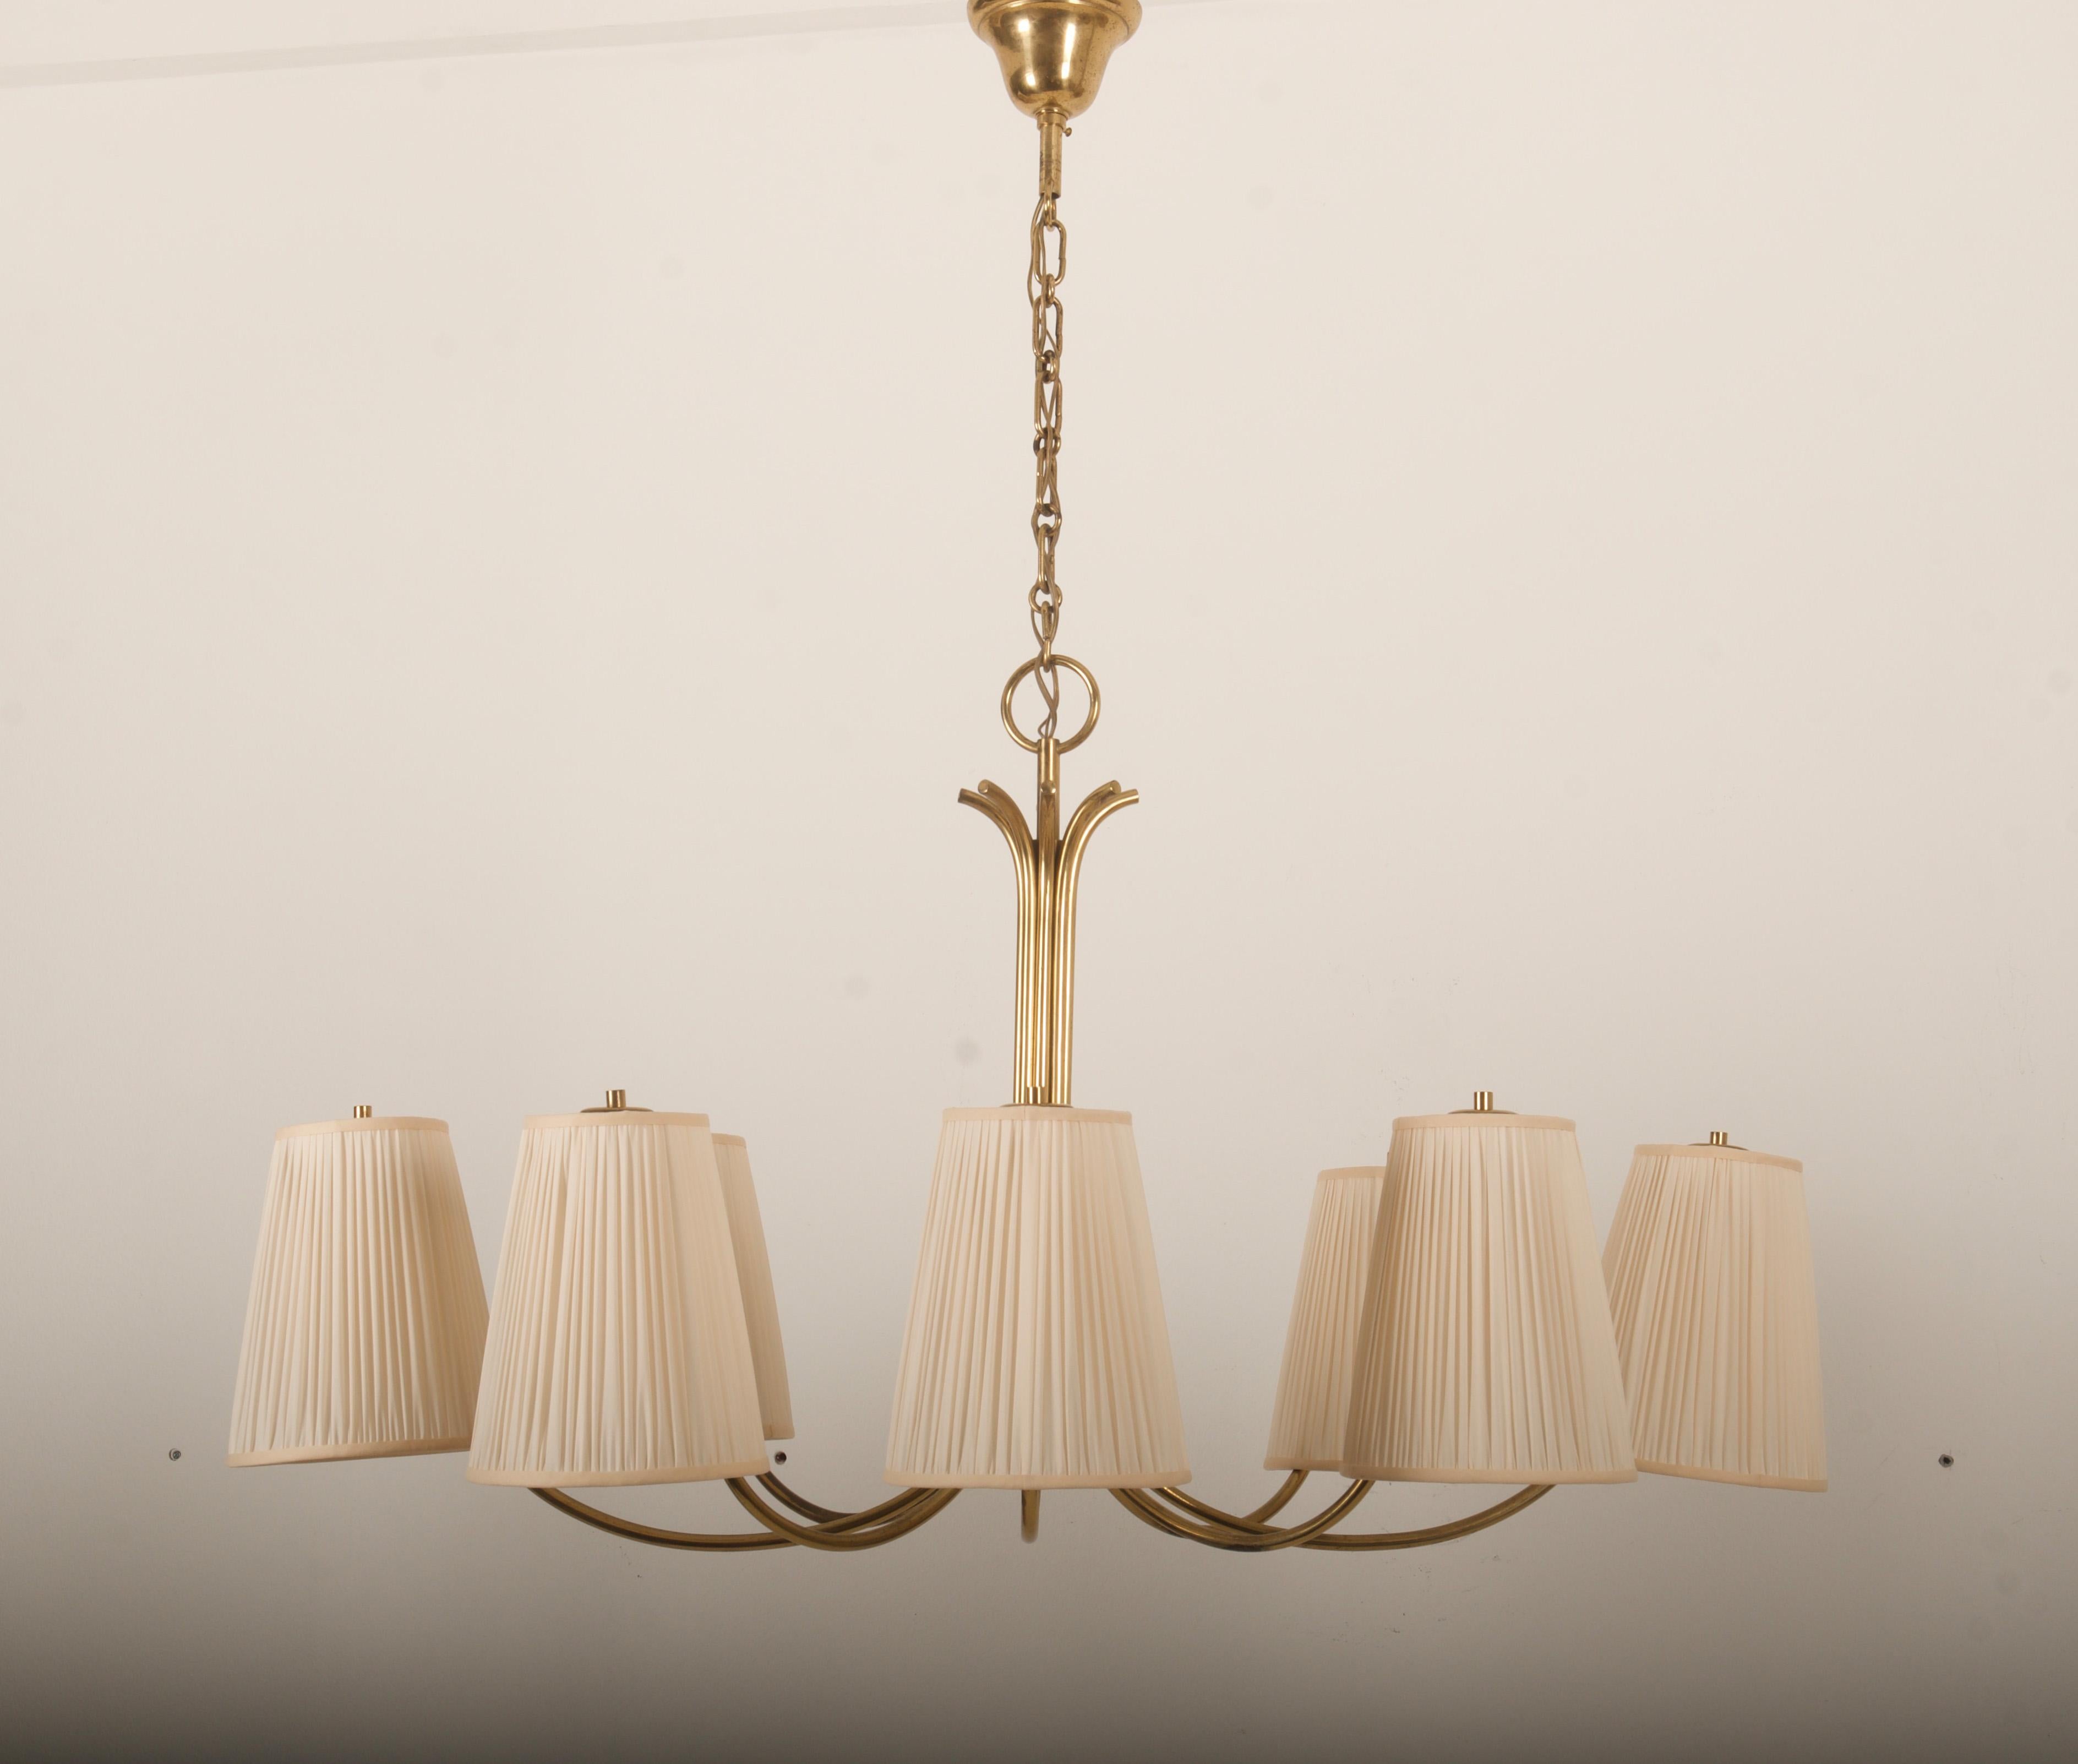 Rare Eight Arms Chandelier by Josef Frank for Kalmar For Sale 2